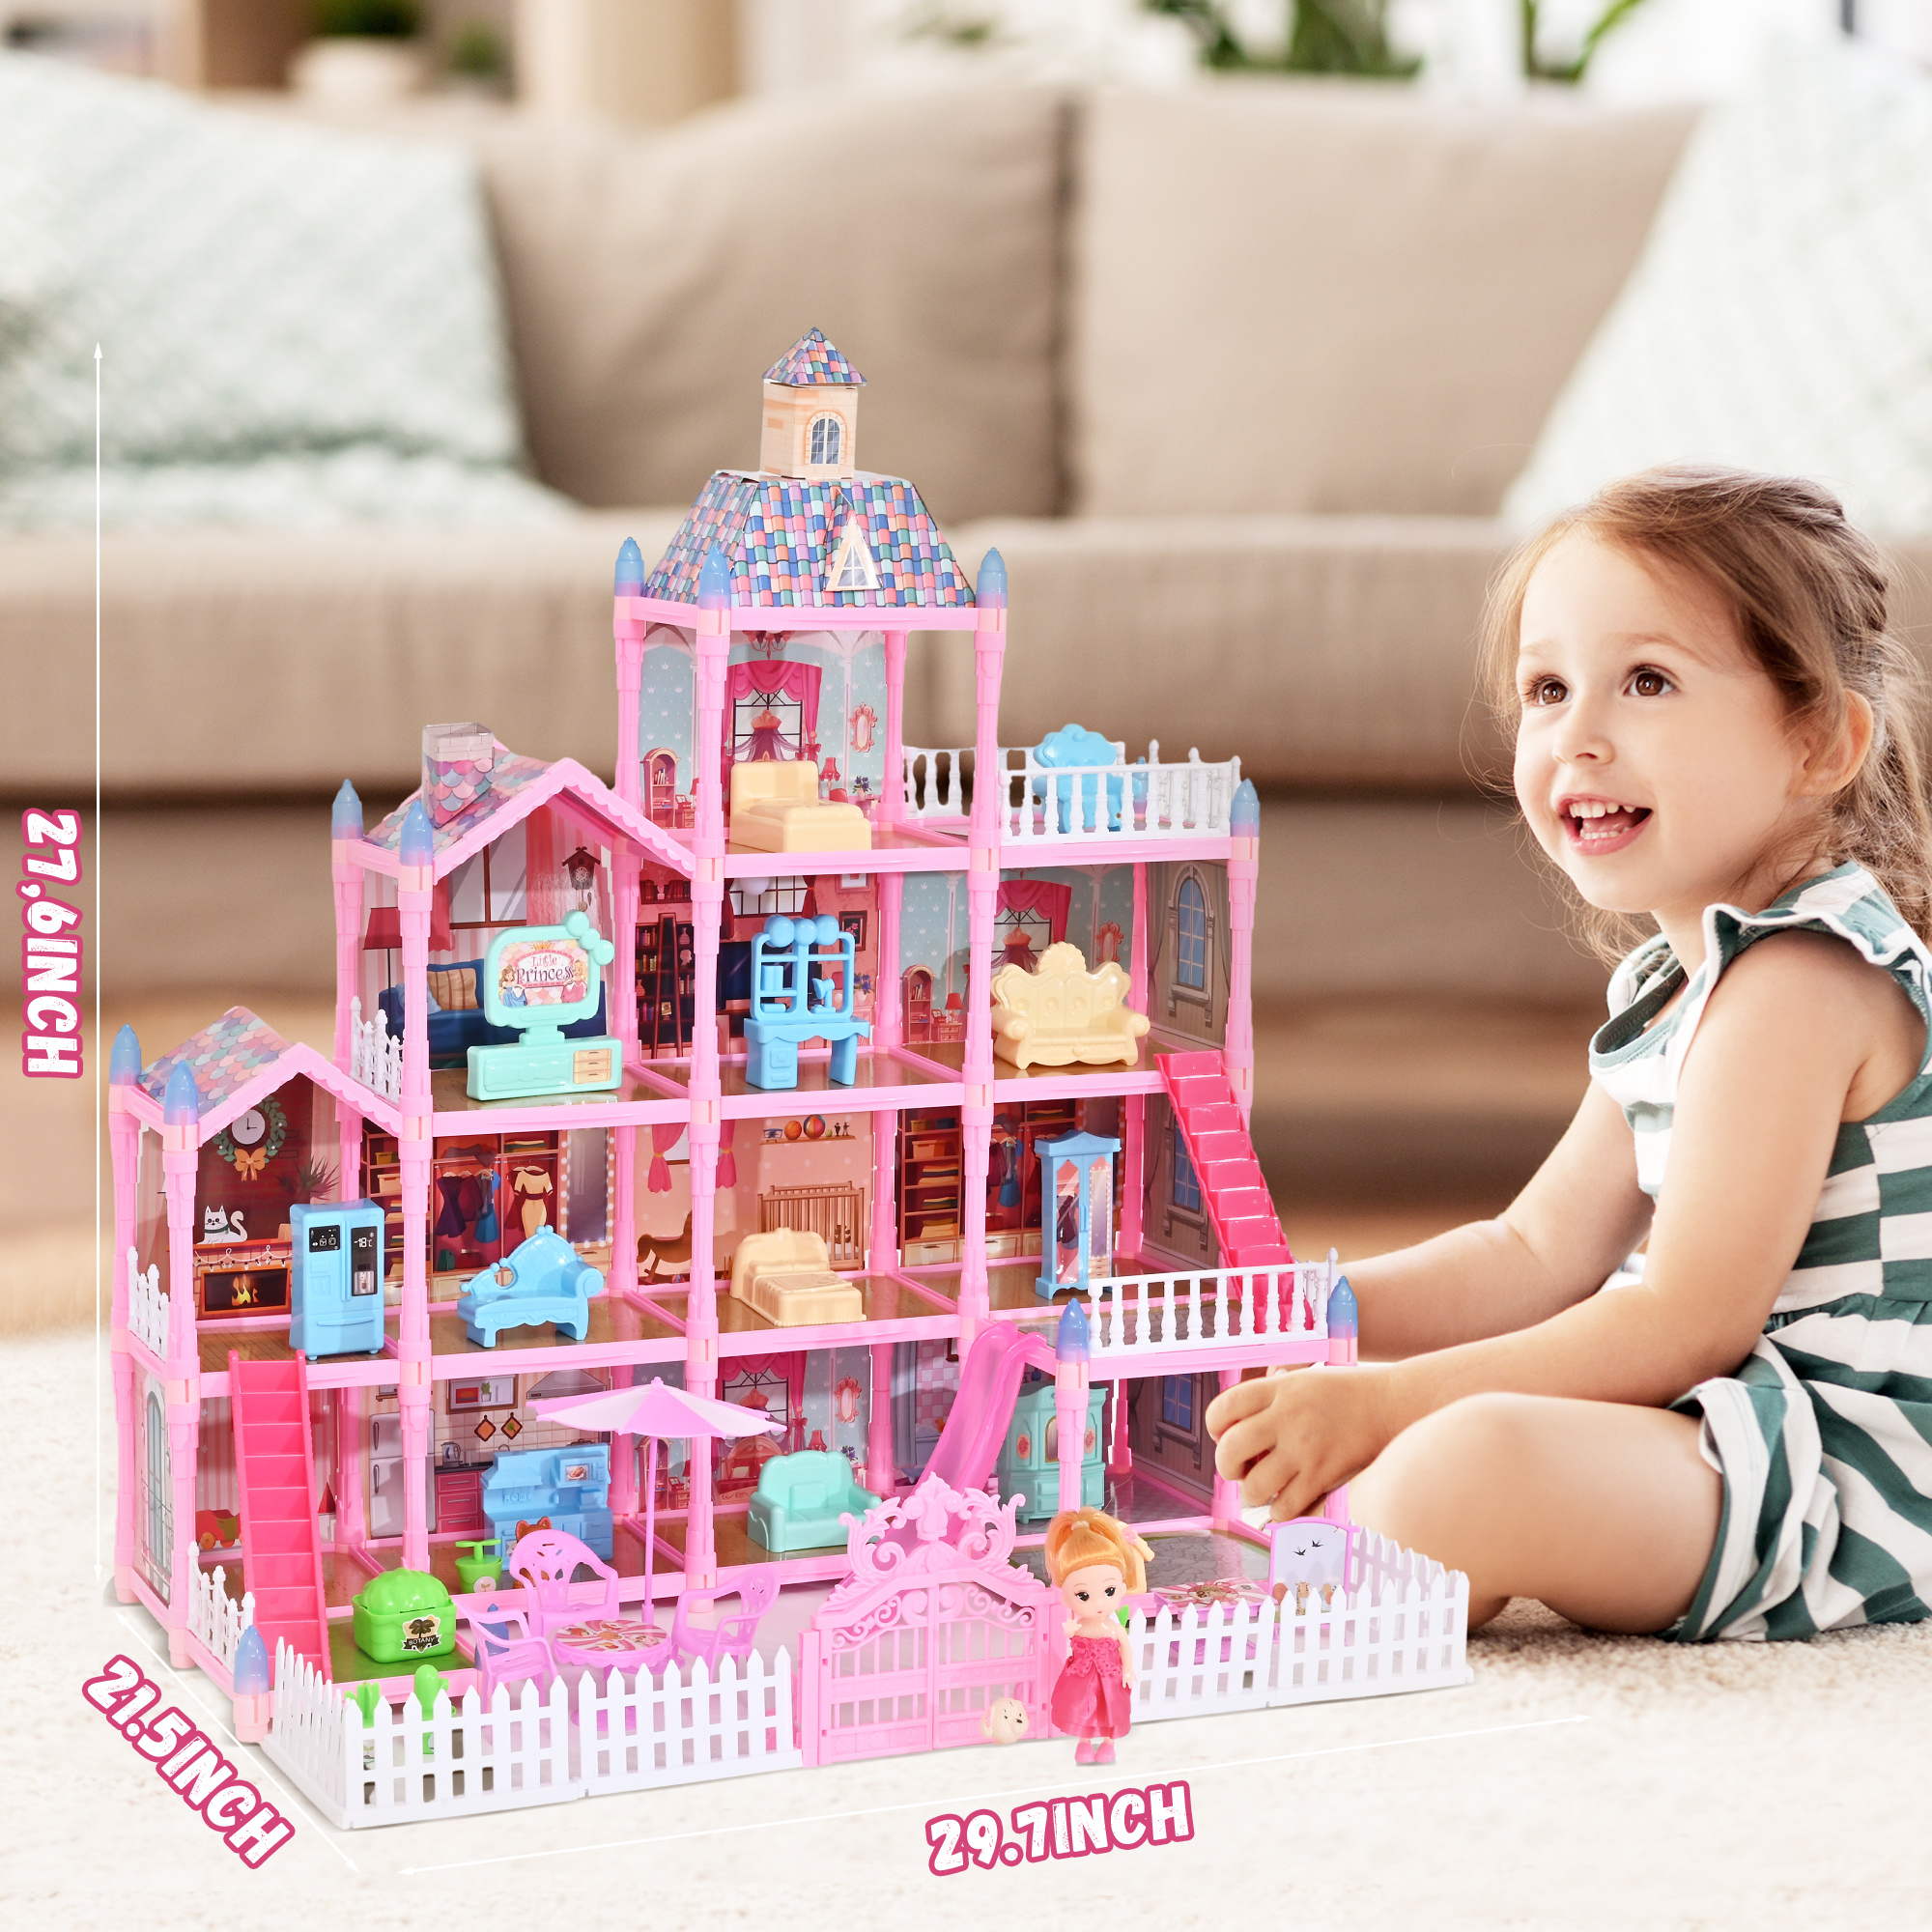 Huge Doll House - 285 PCS Girl Toys Dream Dollhouse 12 Rooms Playhouse with LED Lights Furniture and Accessories, Big Doll House for Princess Age 3-10 - image 4 of 7